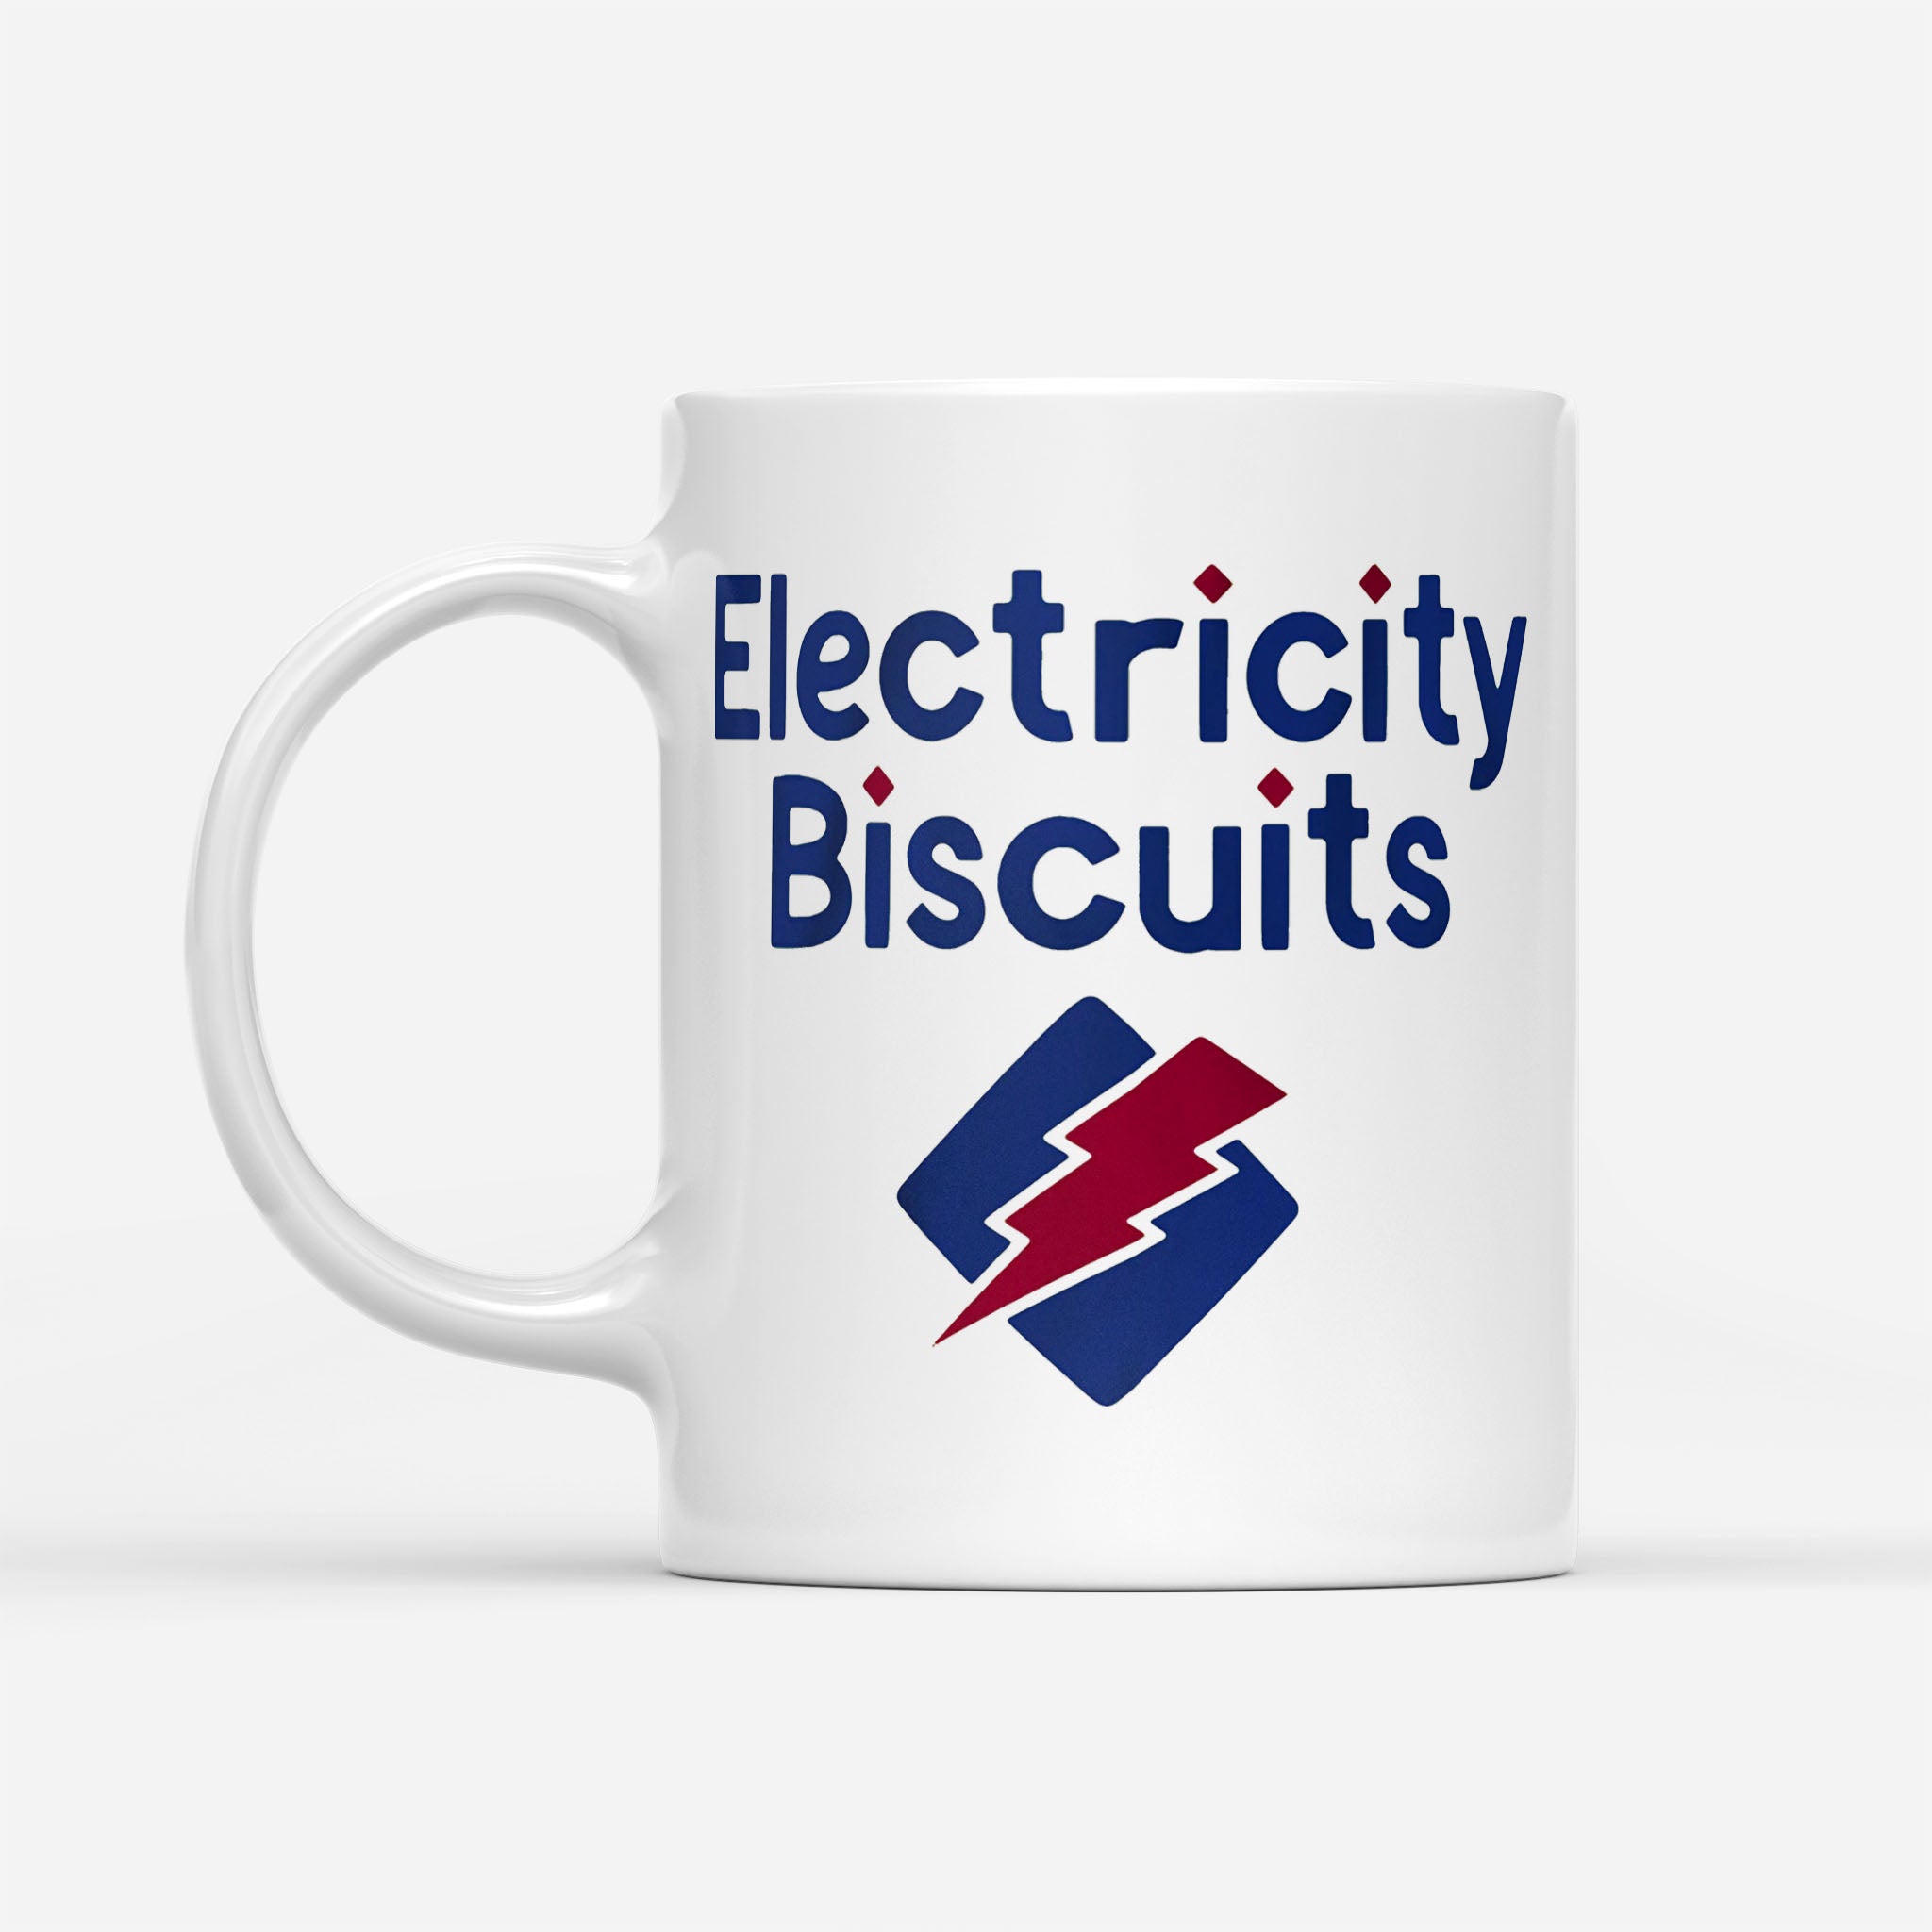 Official Electricity Biscuits 2020 - White Mug